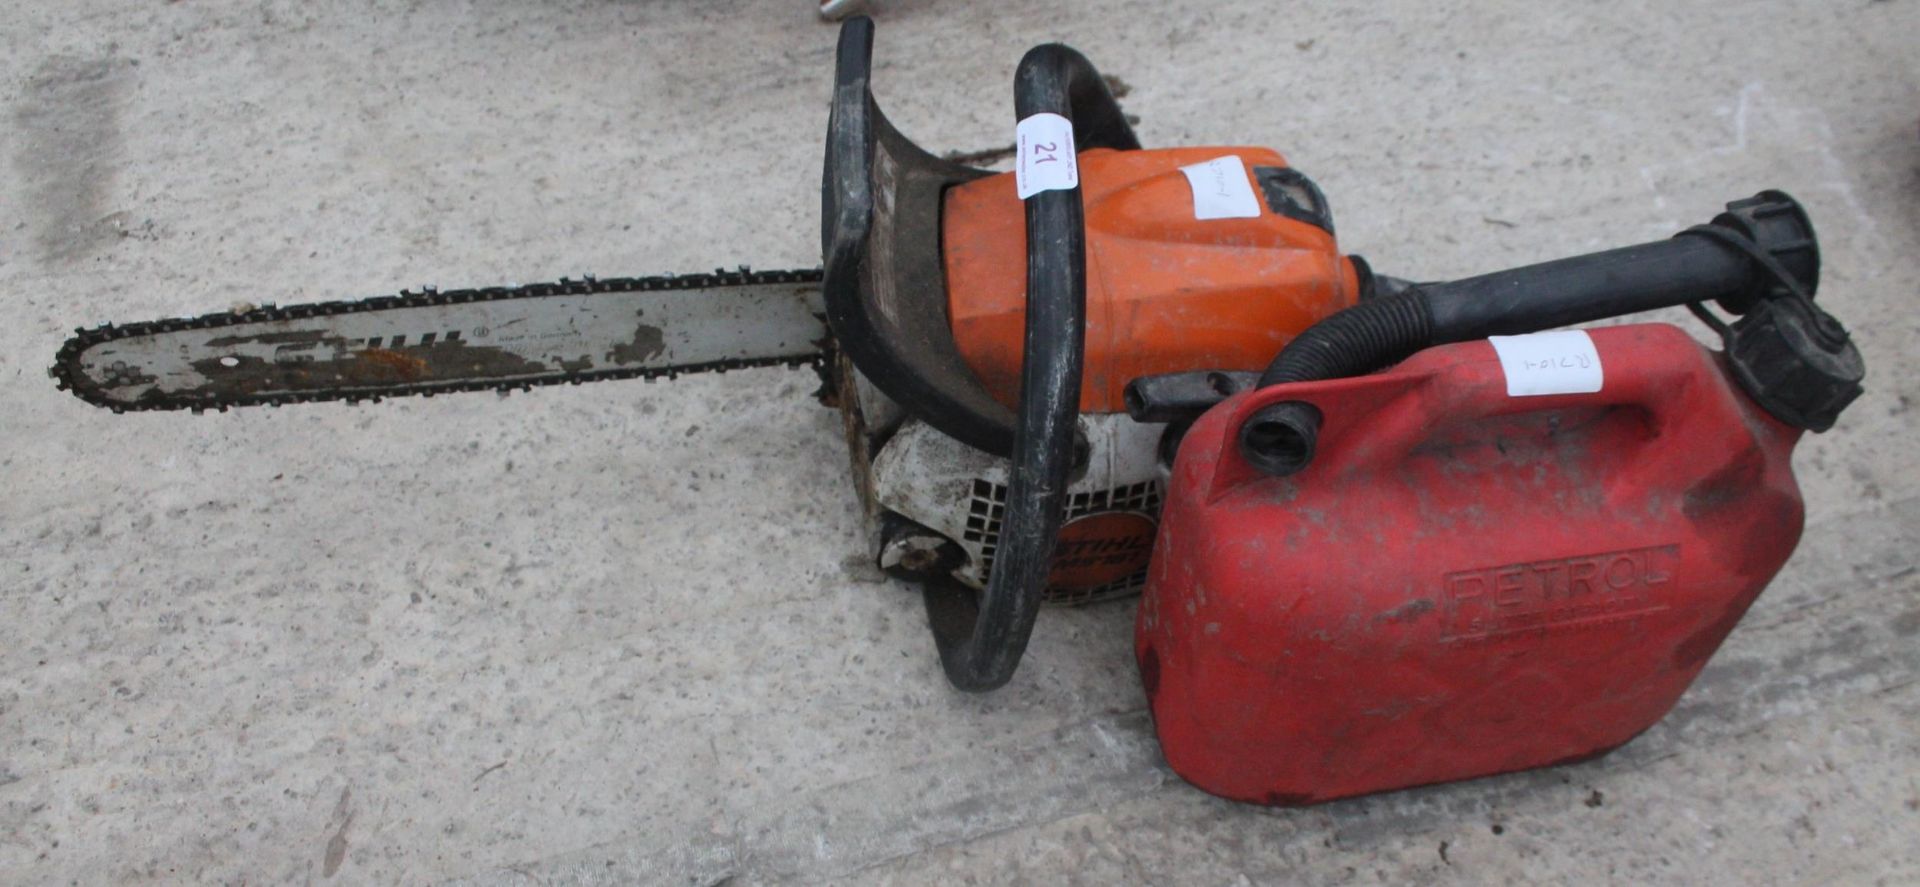 A STIHL M5181 CHAINSAW & FUEL CAN NO VAT